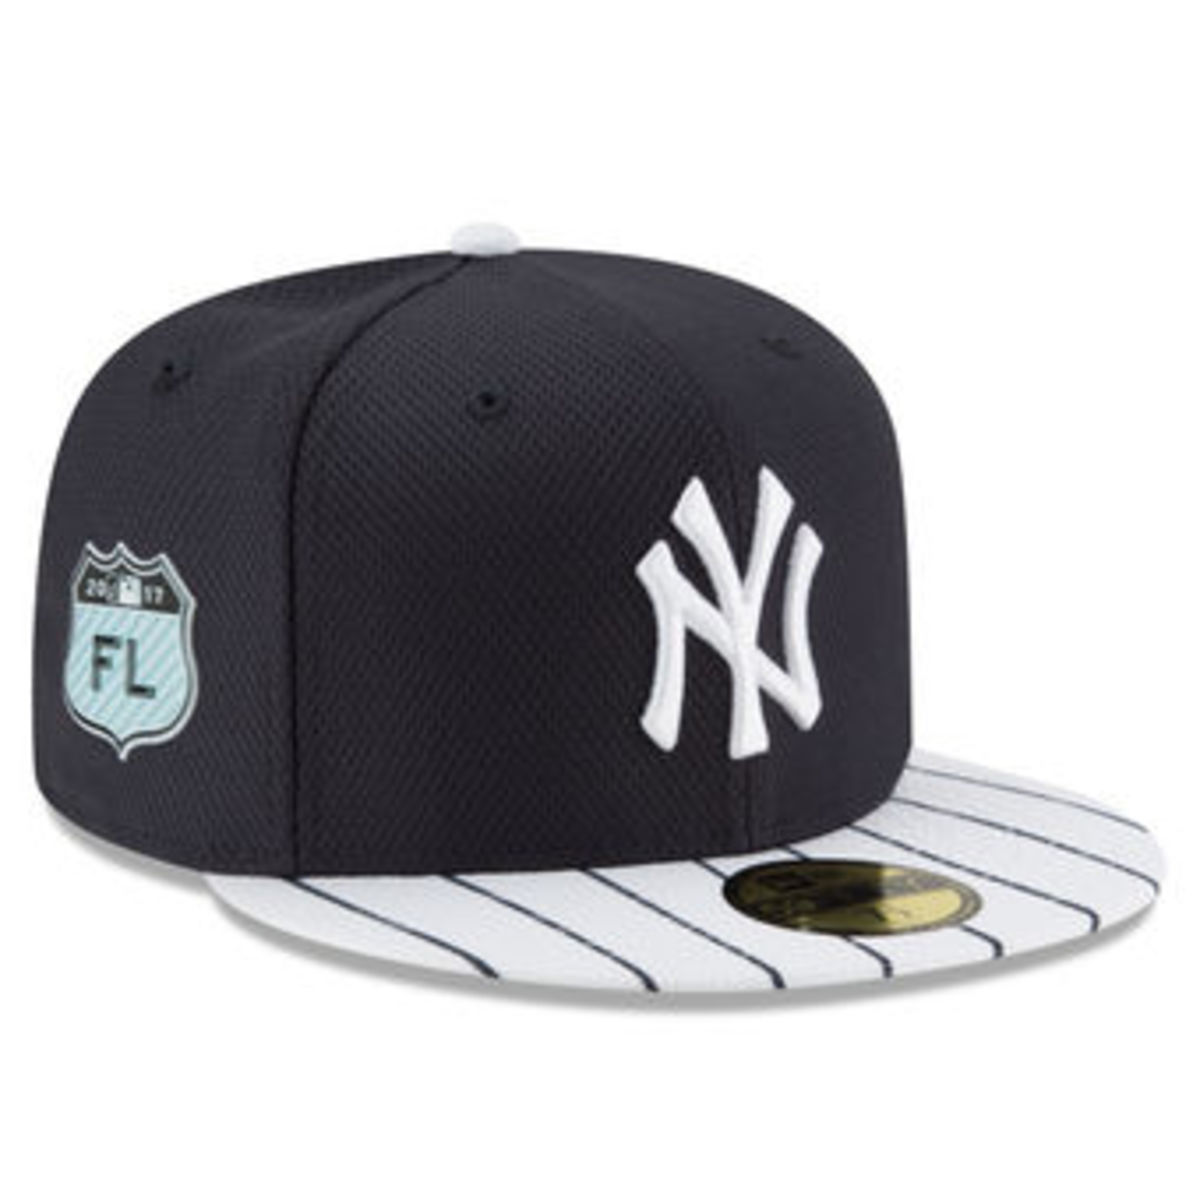 MLB's eight new Spring Training hats, ranked